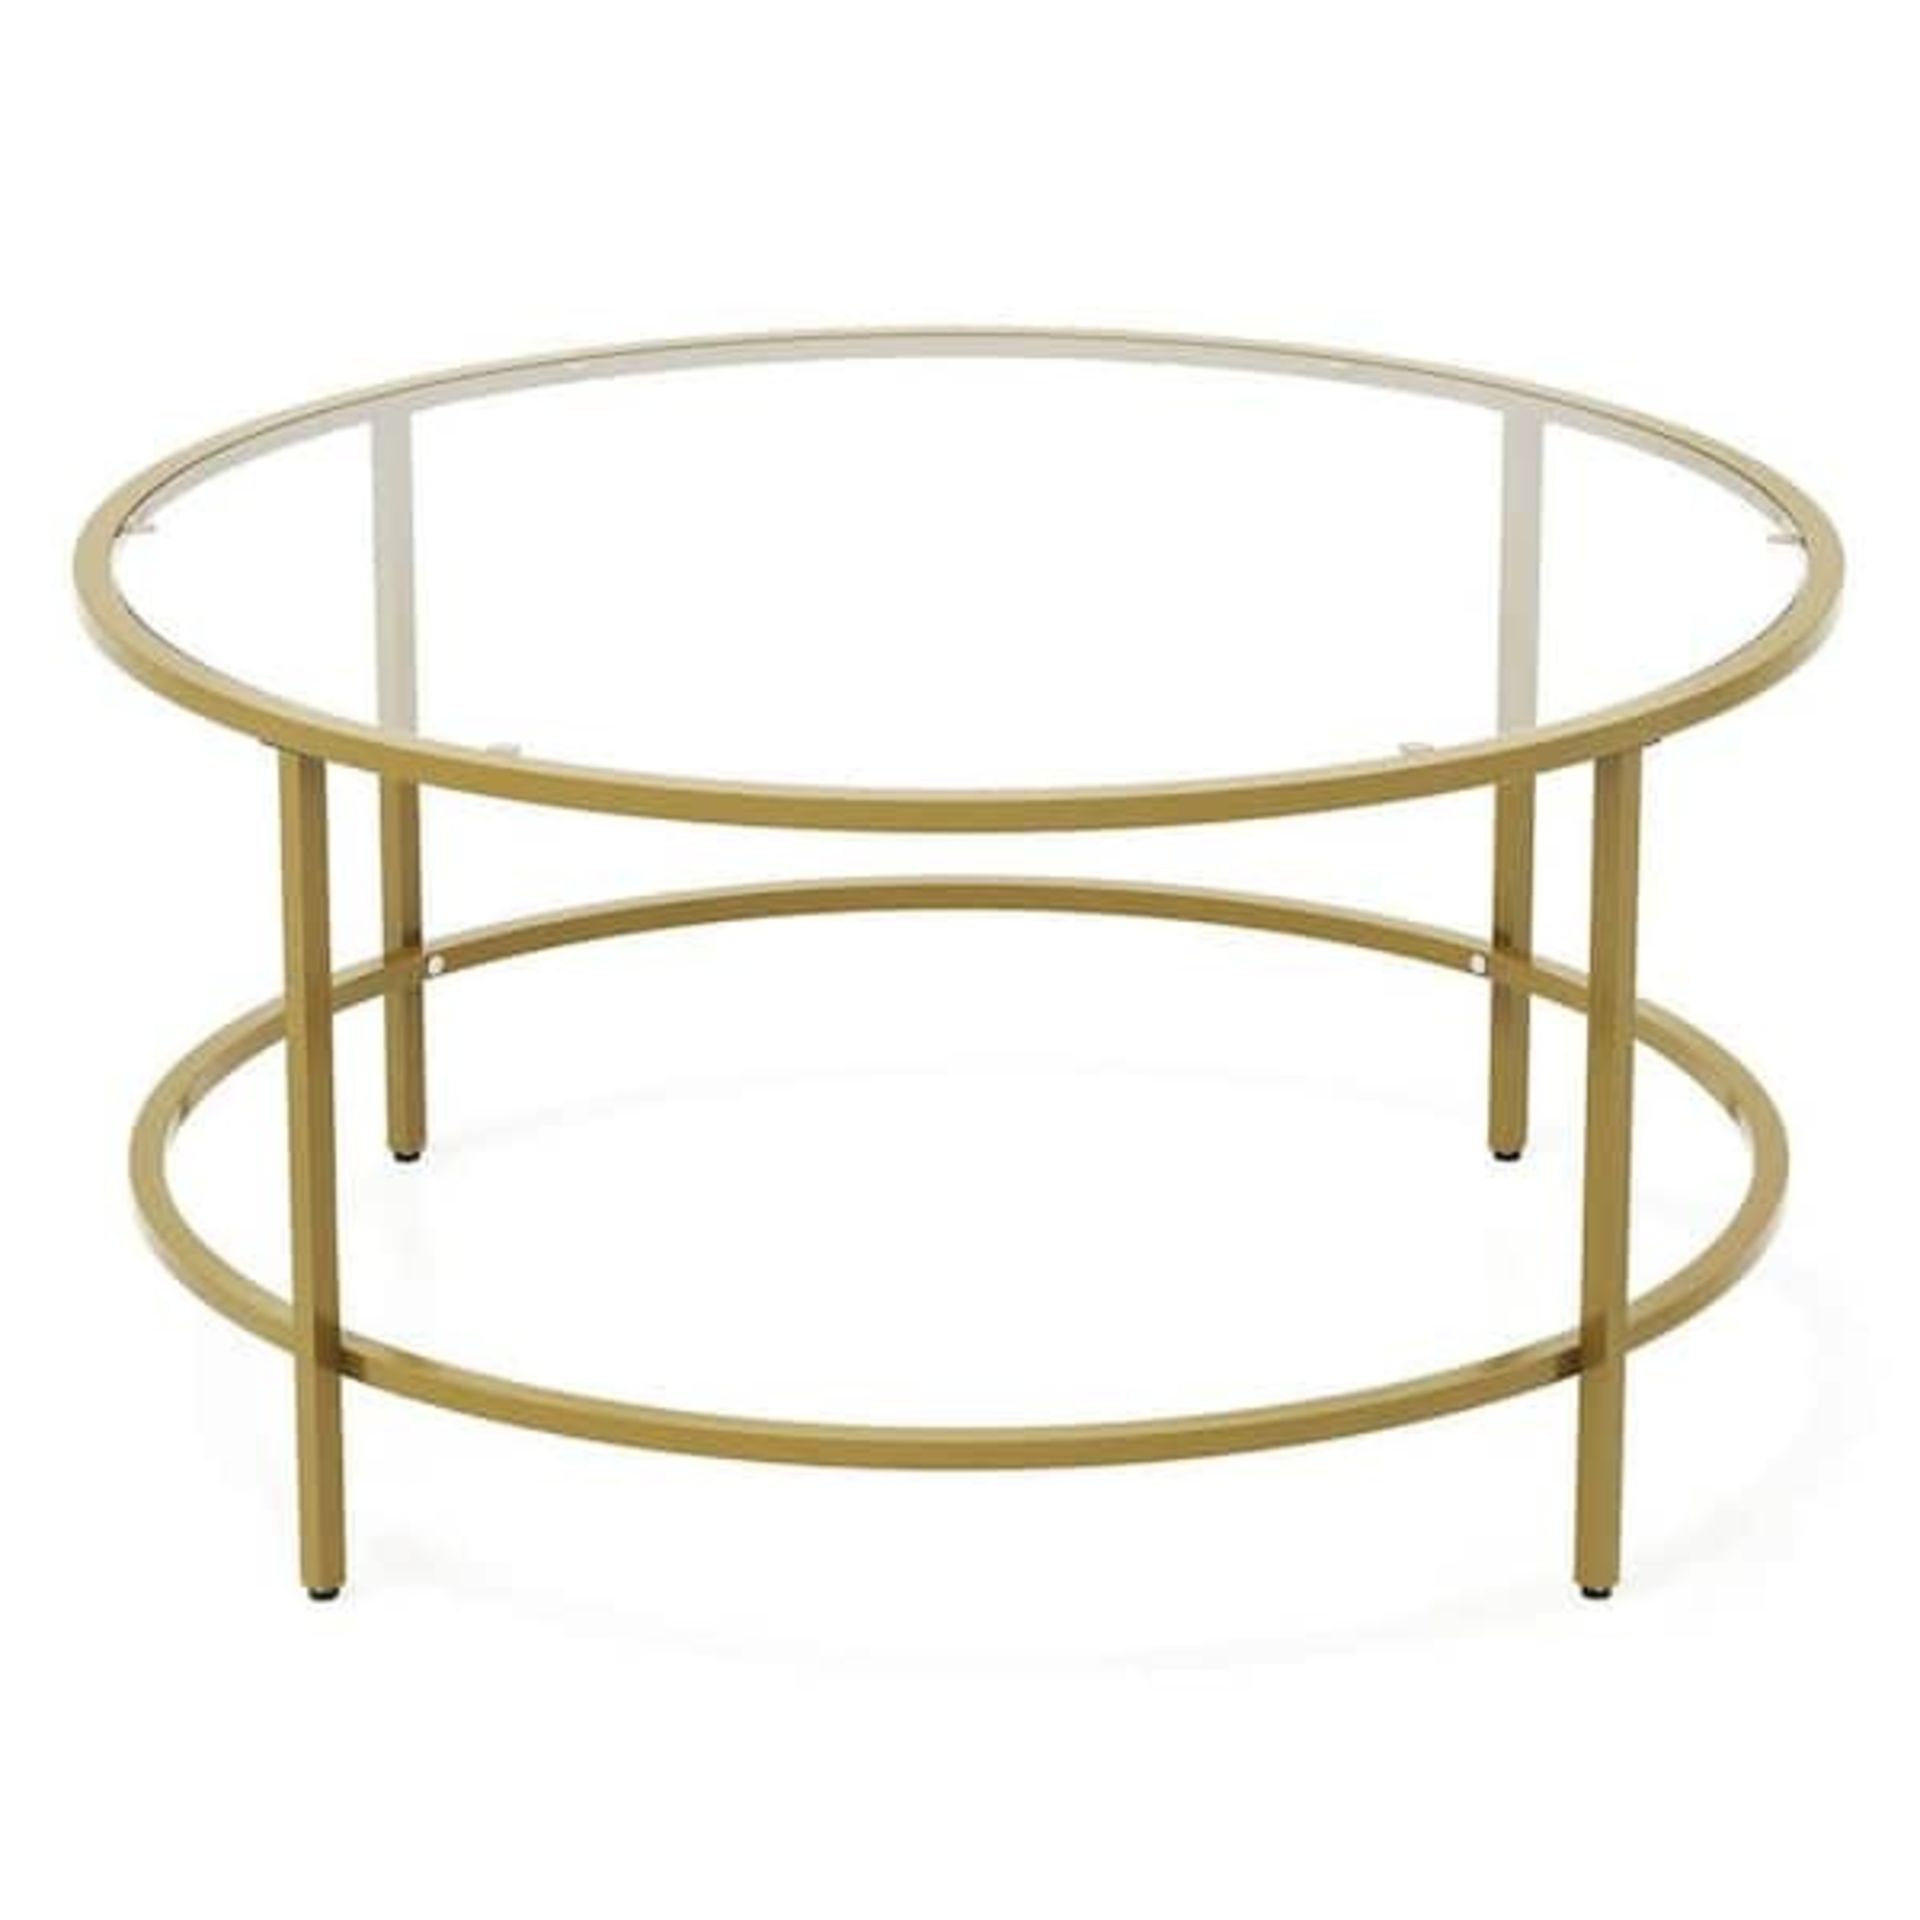 35.5 Inch Round Coffee Table with Tempered Glass Tabletop Gold - ER54